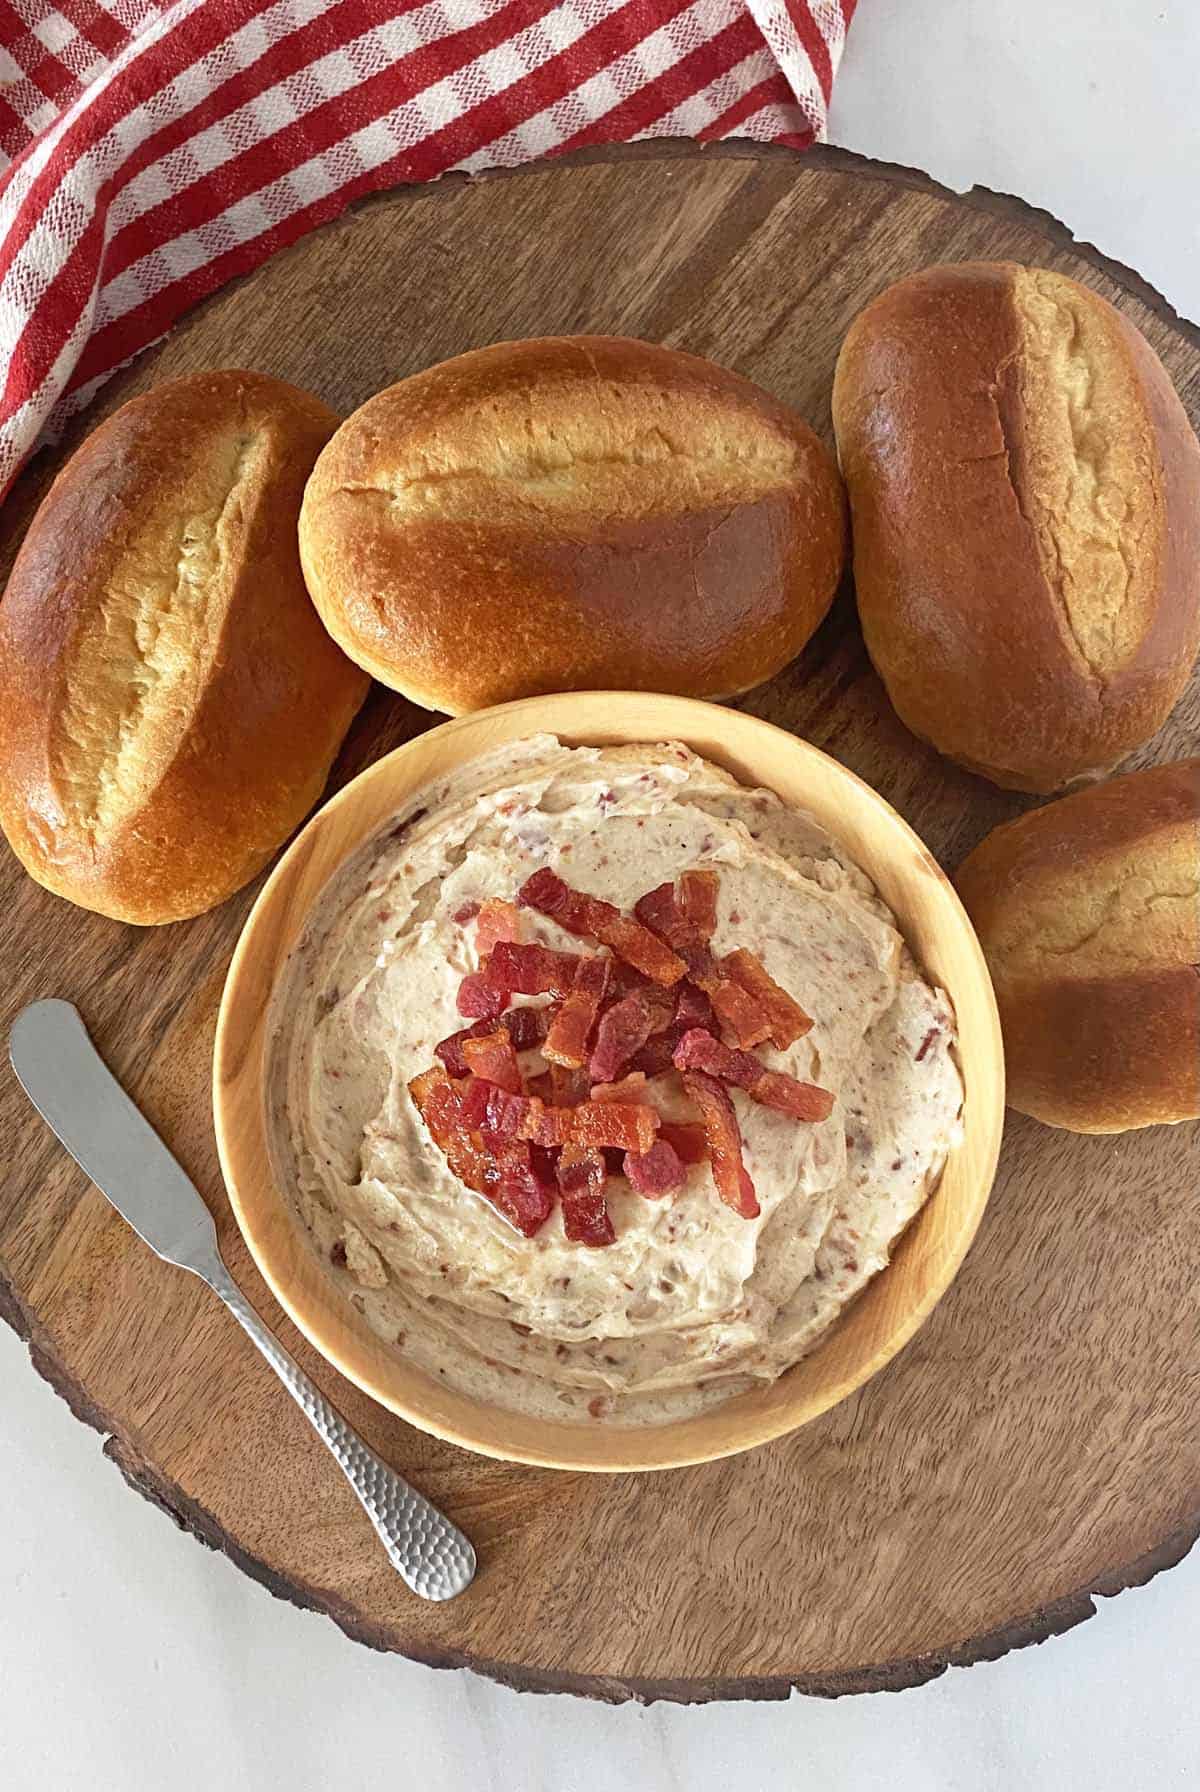 A bowl of bacon butter garnished with bacon lardons, four rolls, and a spreader knife on a wood background.